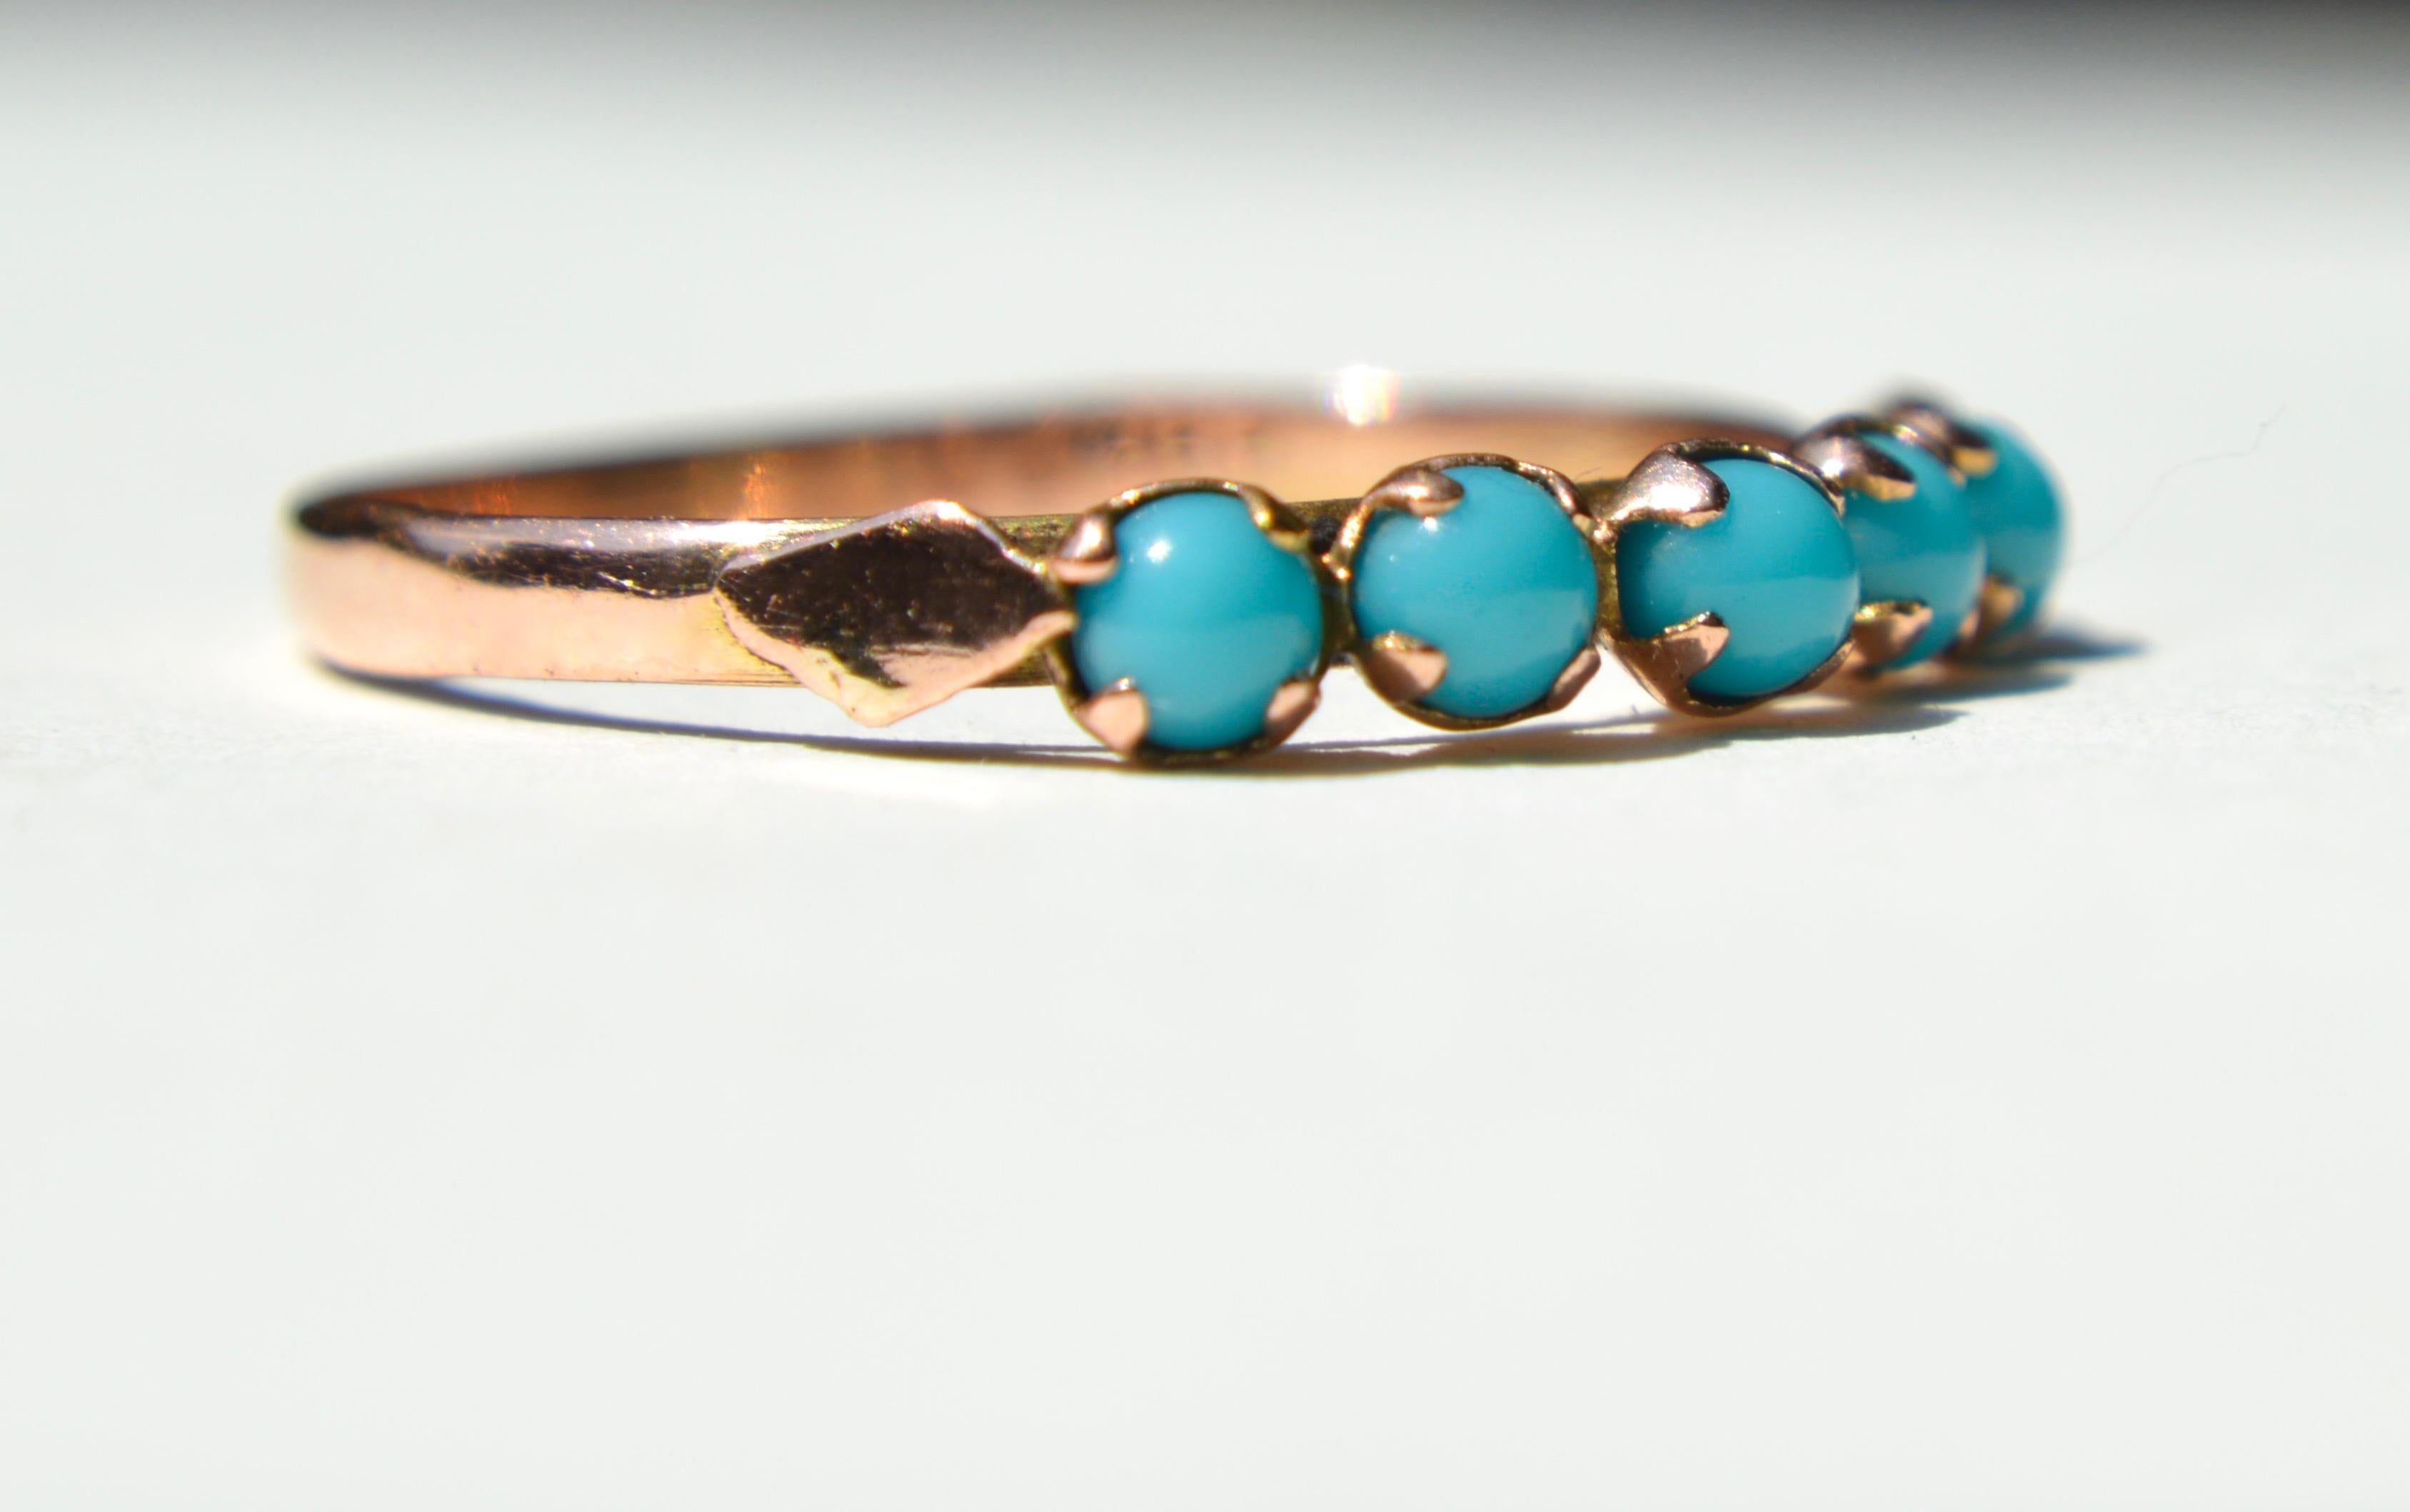 Lovely vintage circa 1930s 14K rose gold sleeping beauty turquoise 5 stone band. Size 9.25, can be resized. Marked and tested as 585 for 14K gold. In good condition. Each round sphere stone measures 3mm in diameter. 